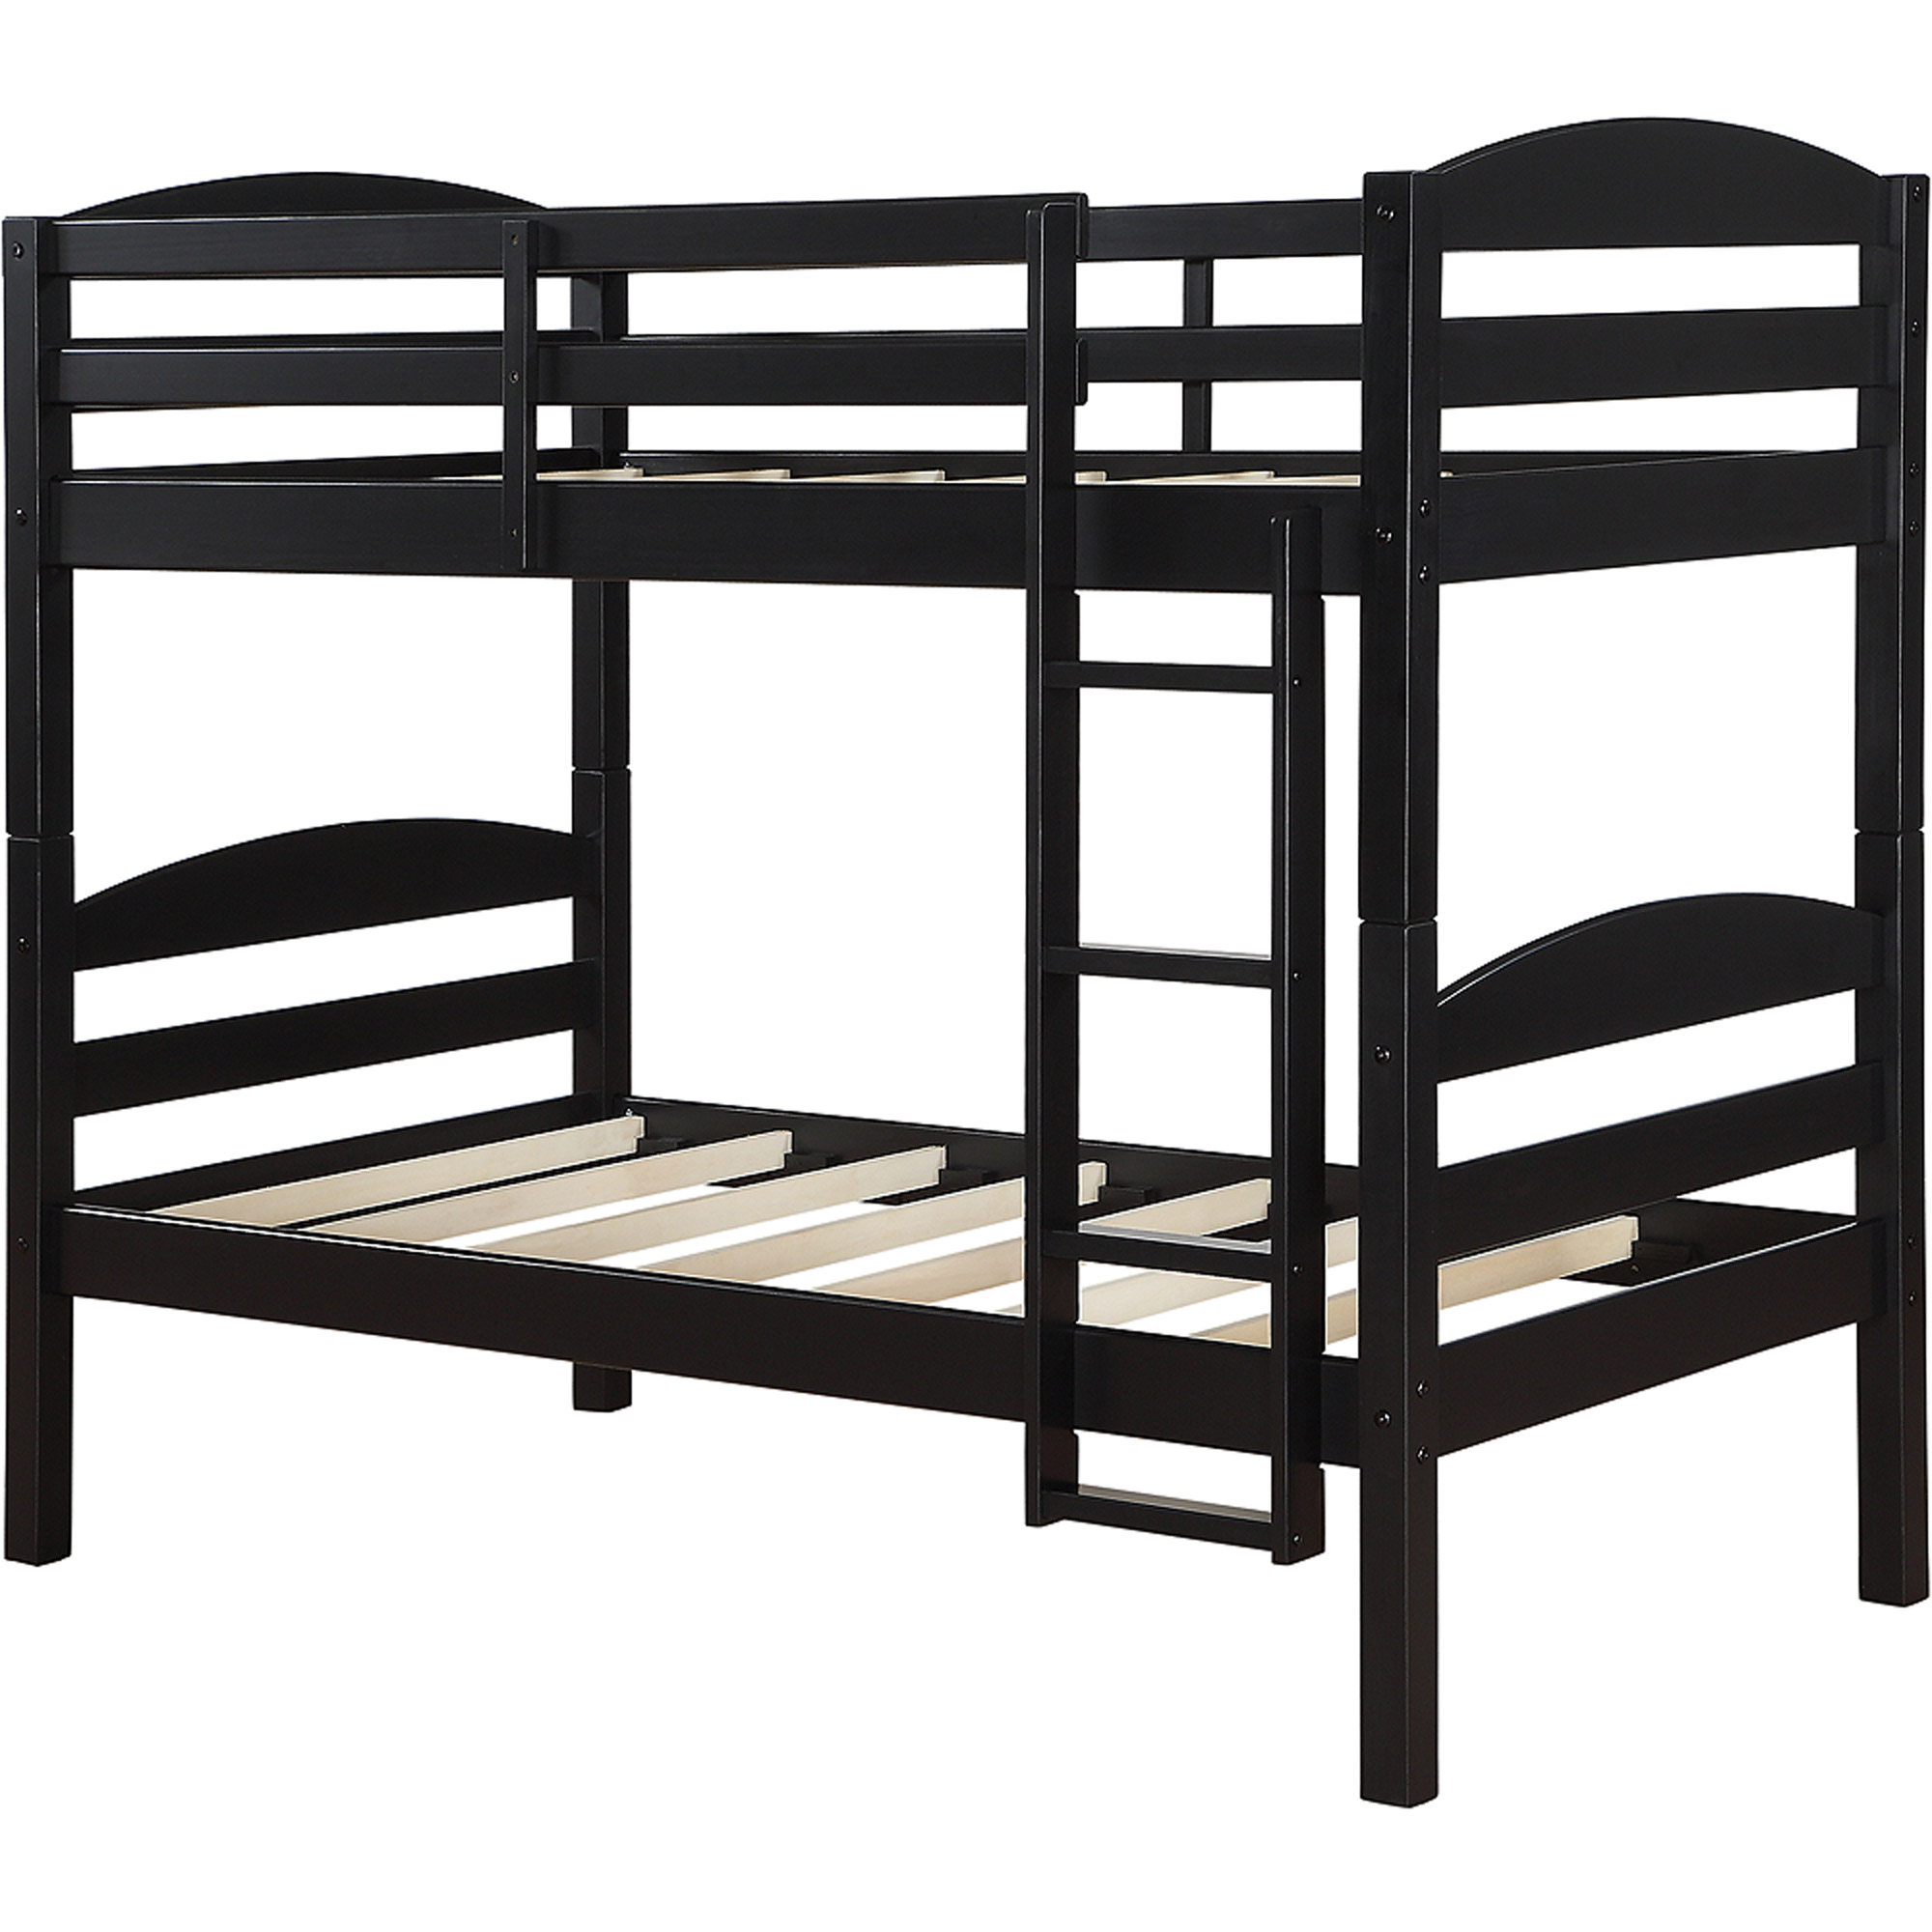 Bunk beds better homes and gardens Leighton Twin over twin wooden bunk beds, multiple KRIYGYC